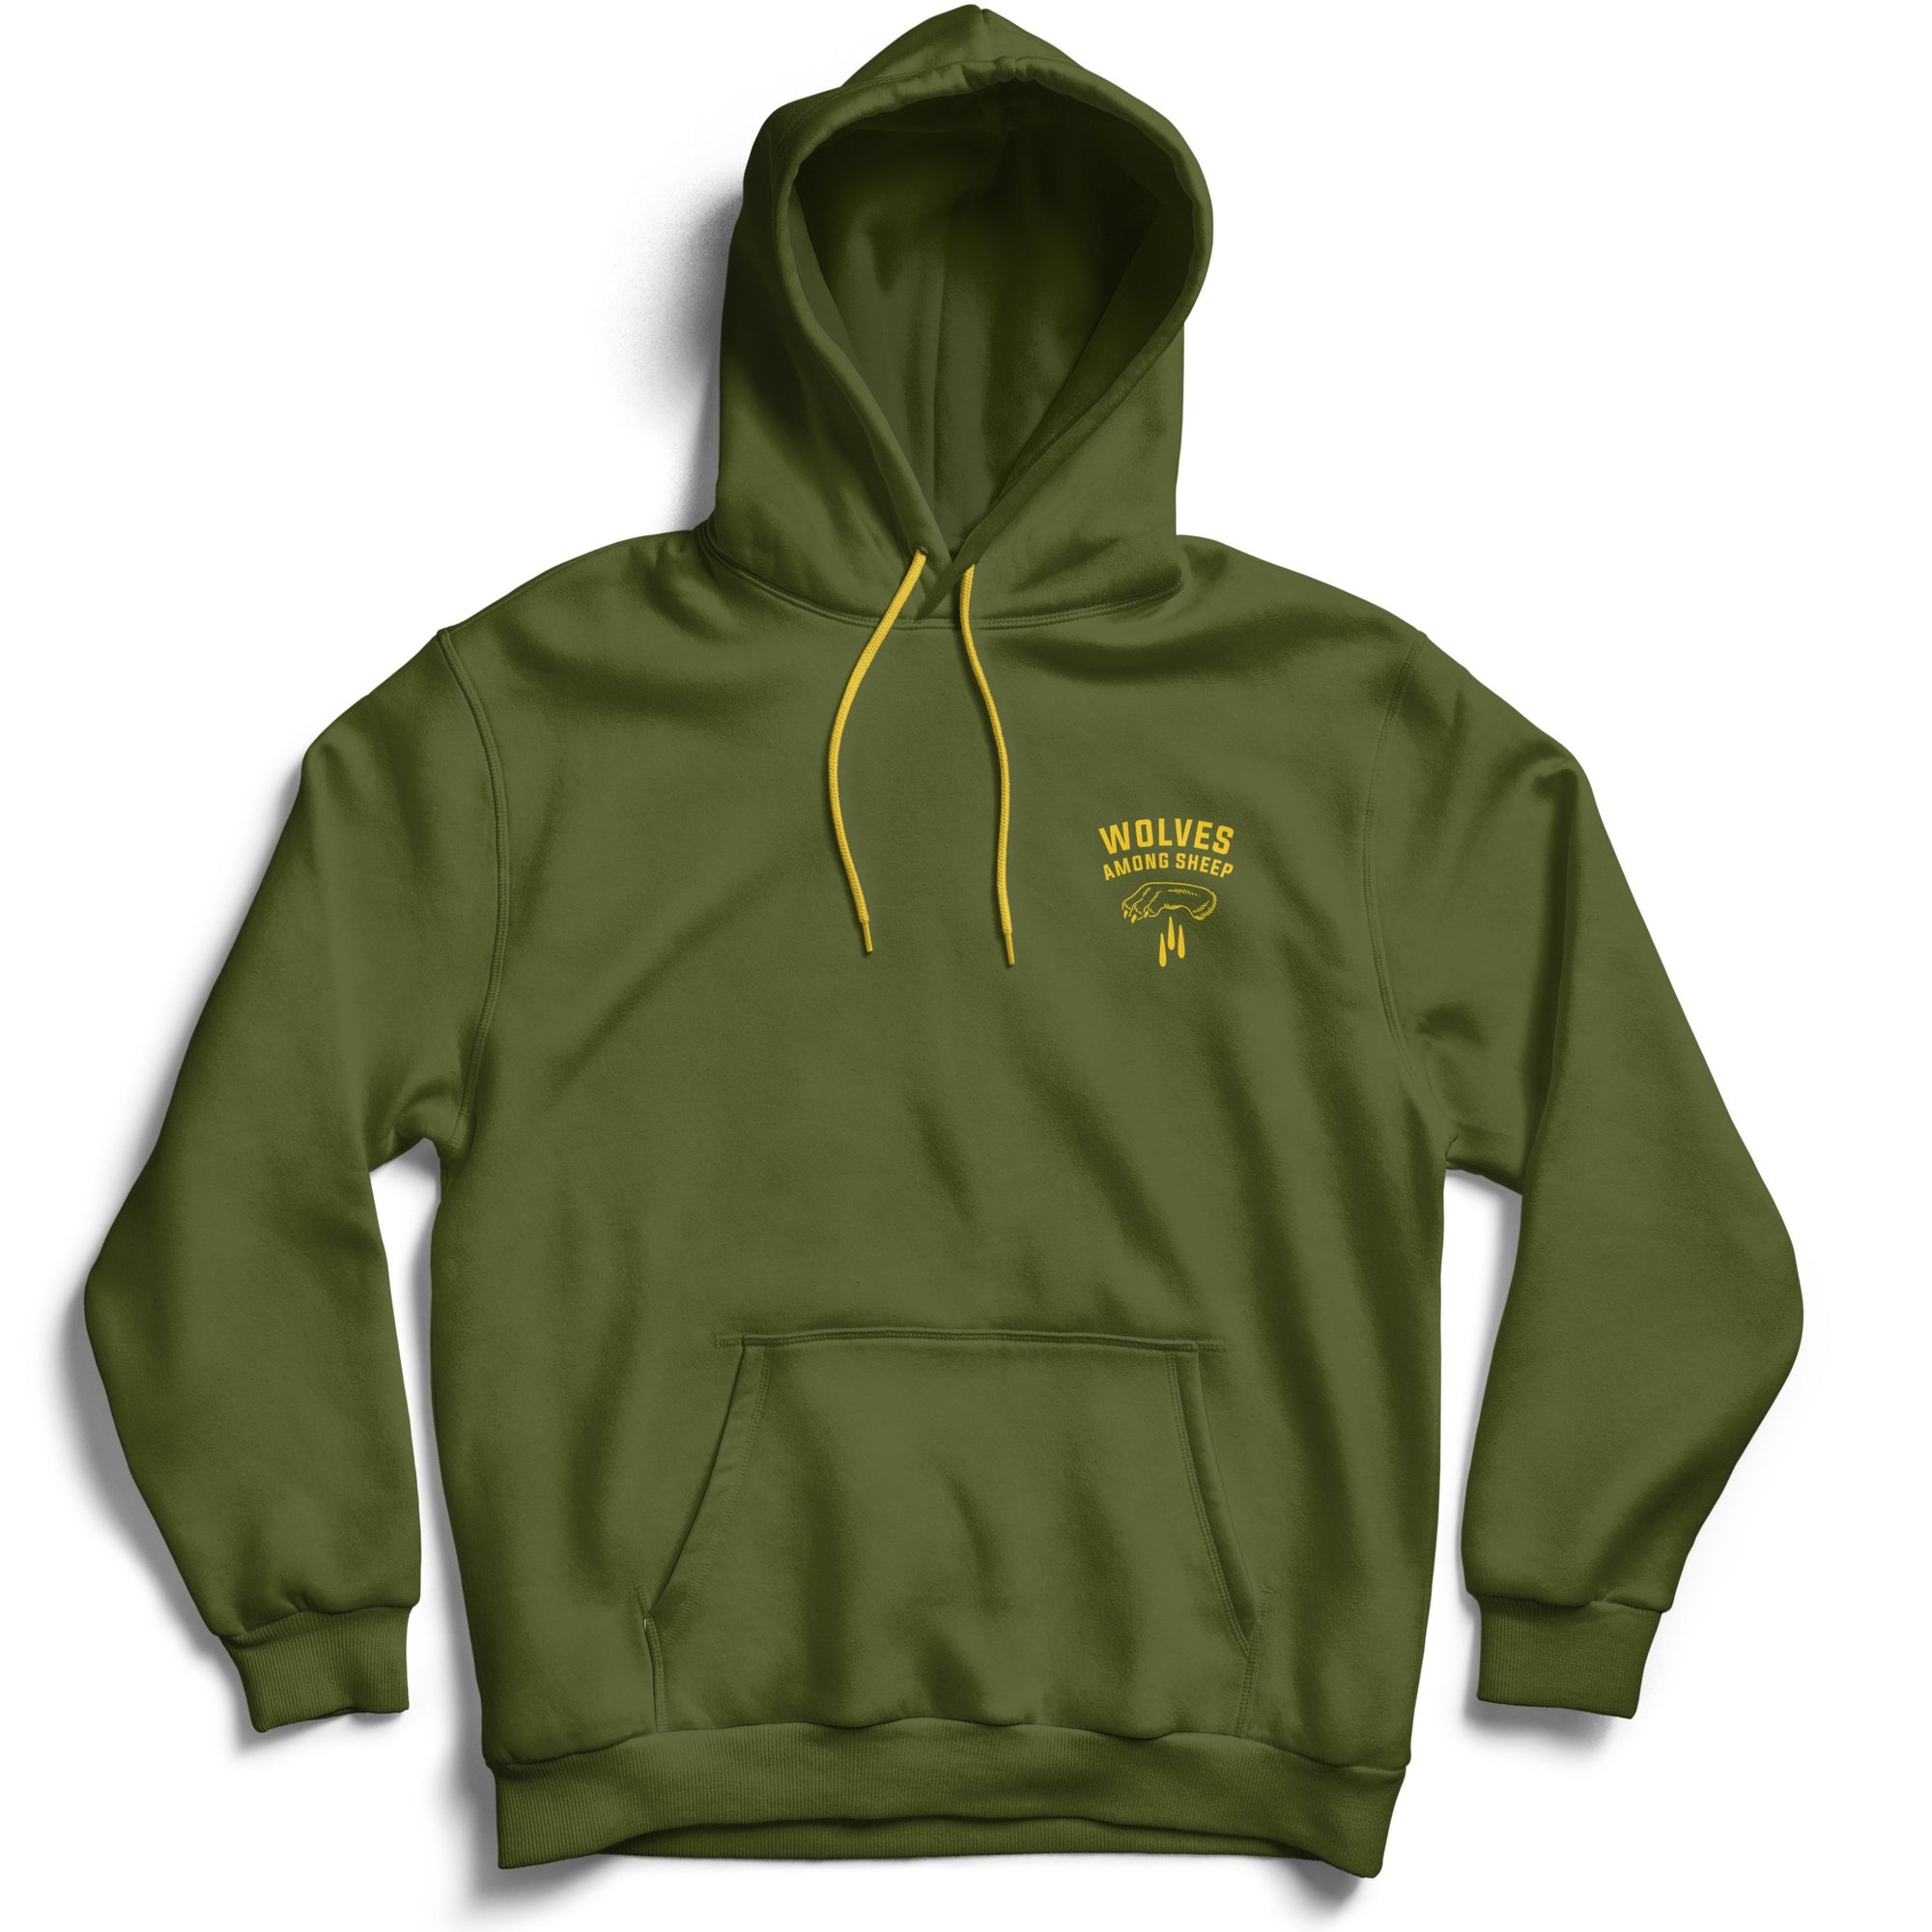 WOLVES AMONG SHEEP HOODIE v2 - OLIVE